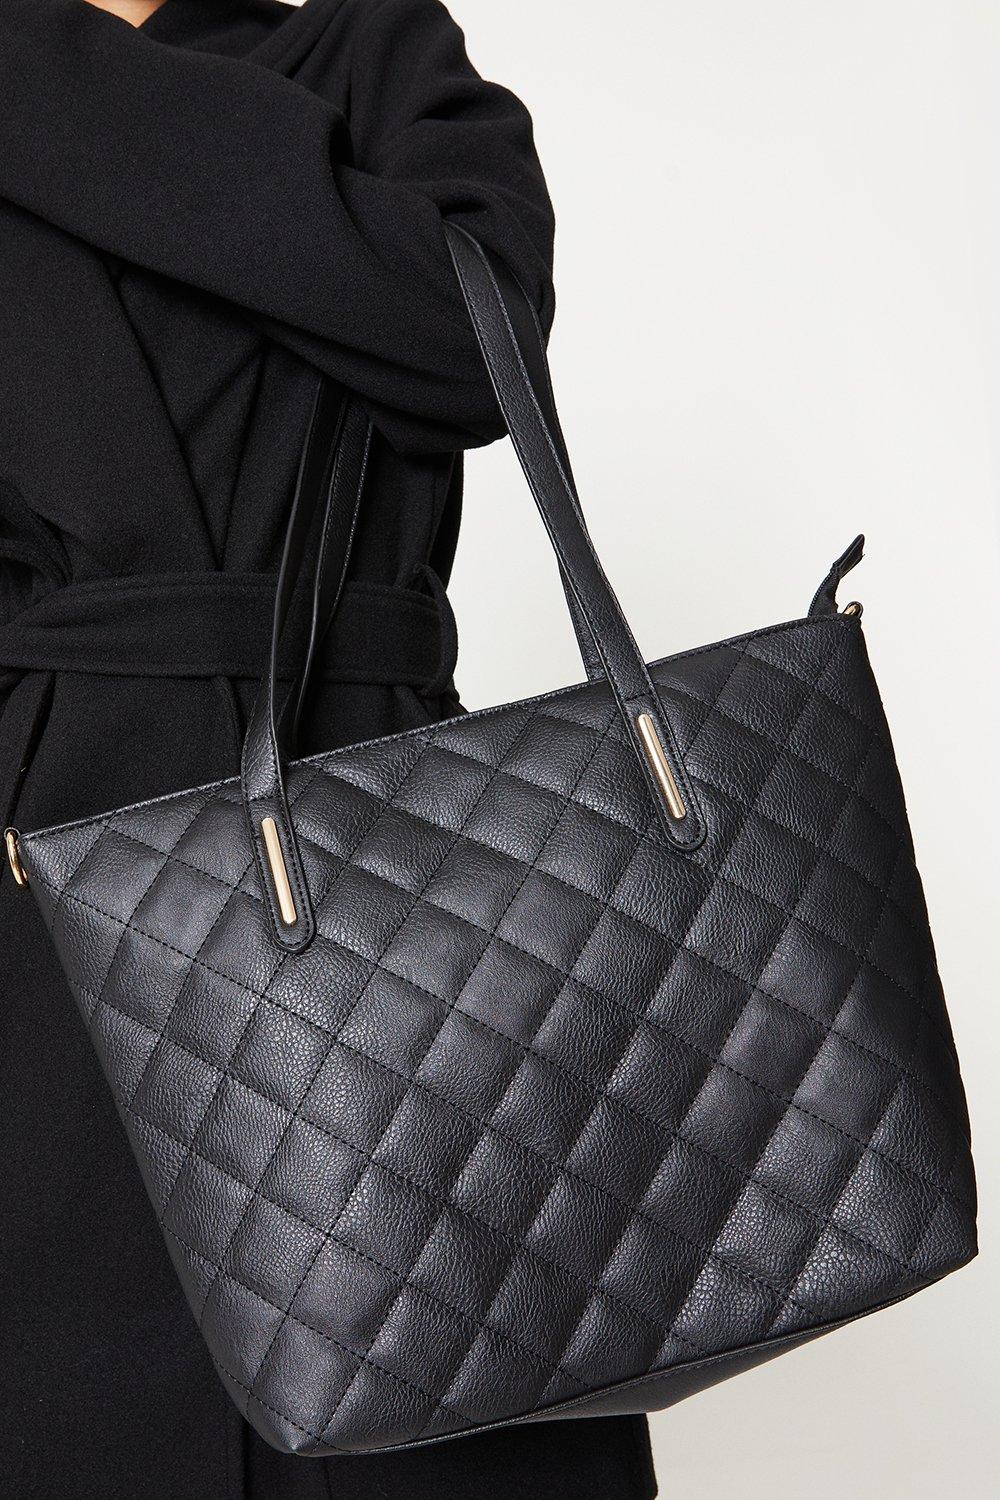 Women's Tessa Quilted Tote Bag - black - ONE SIZE